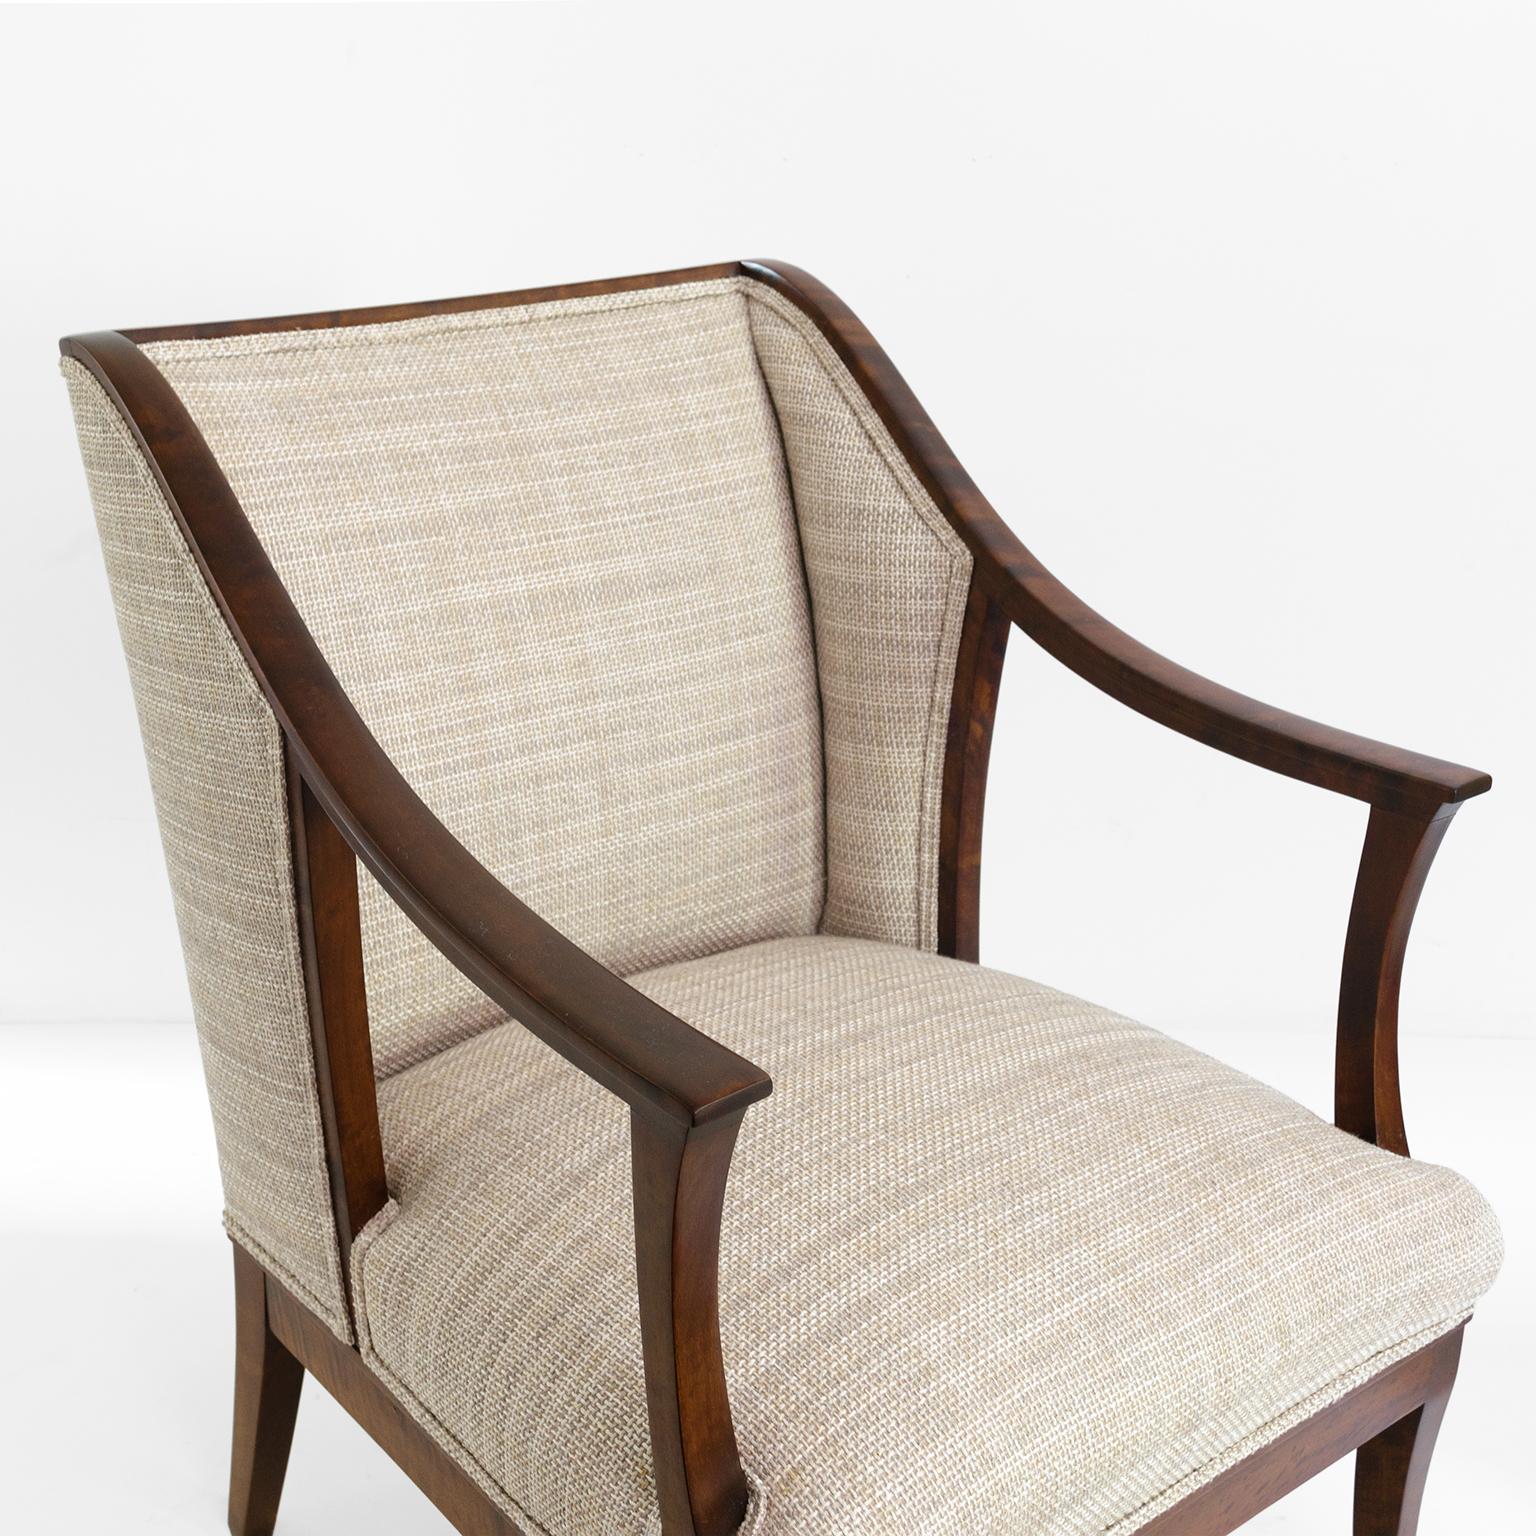 Swedish Armchairs in Stained Solid Birch, by SFM Bodafors, circa 1930 For Sale 2